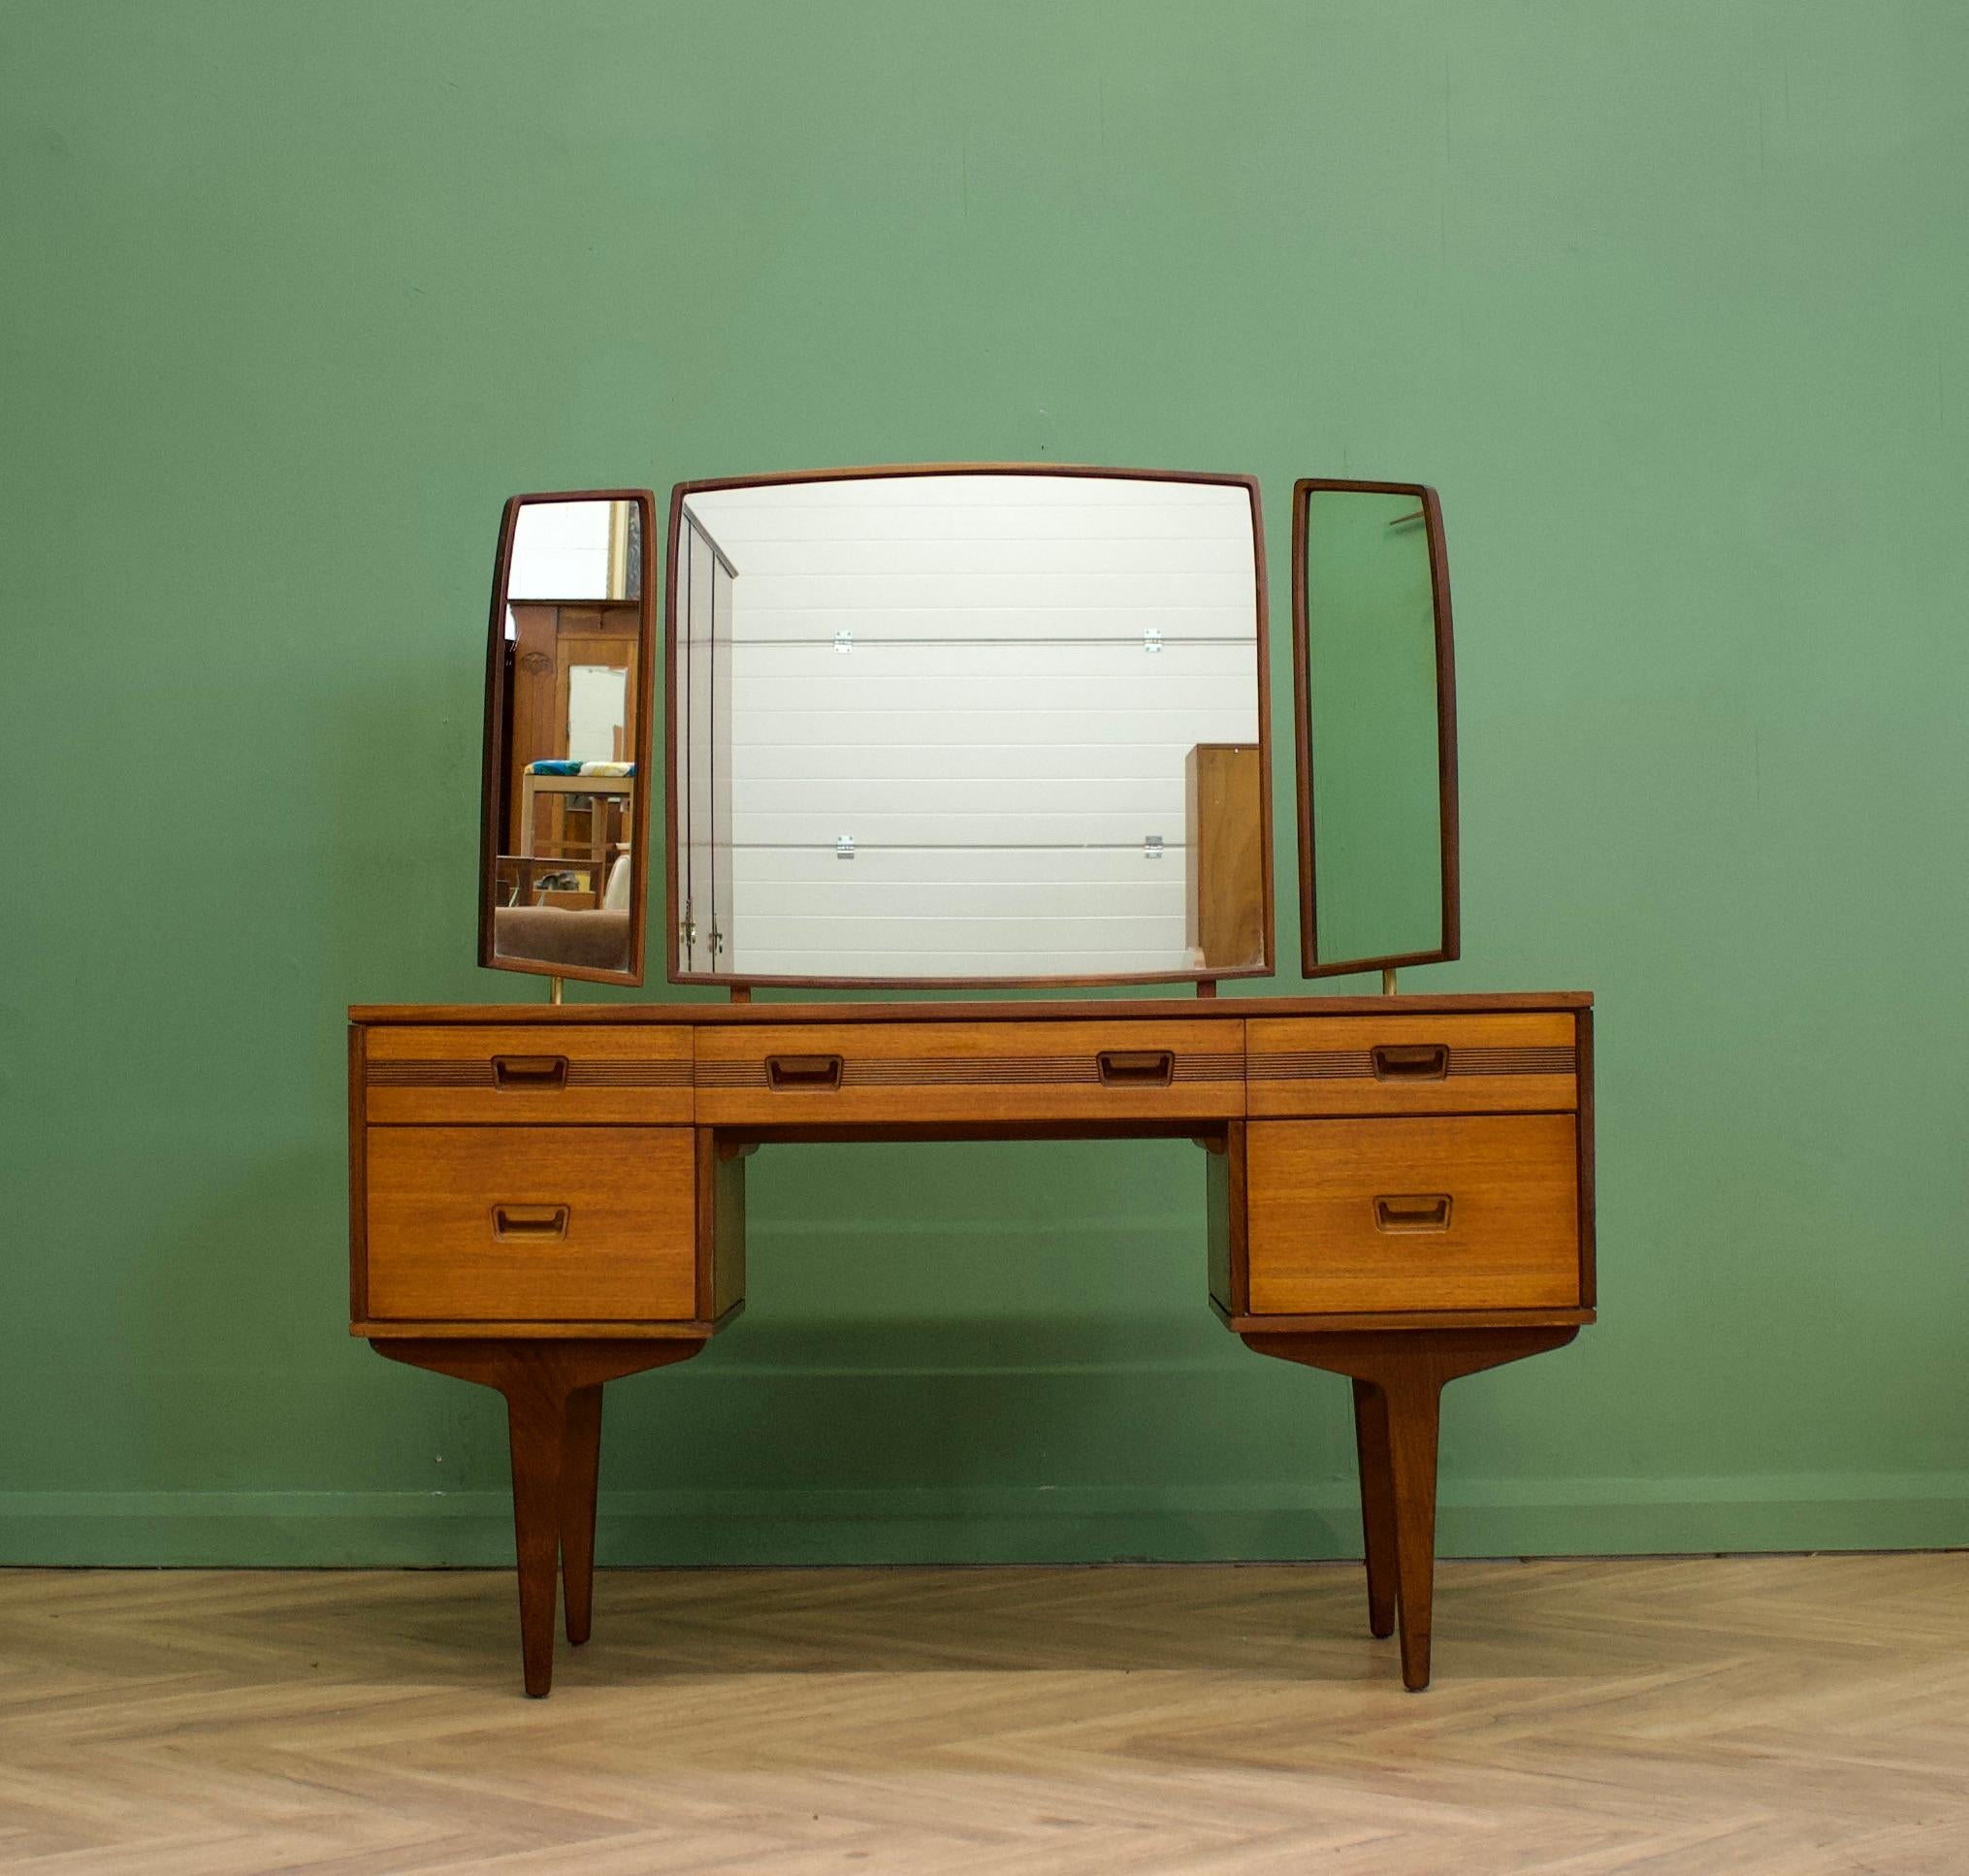 A mid century teak dressing table from Butilux - a little known about  high quality furniture makers, circa 1960's
Complete with a triptych mirror - all three are adjustable either by tilting or swiveling - the two side mirrors are held by brass